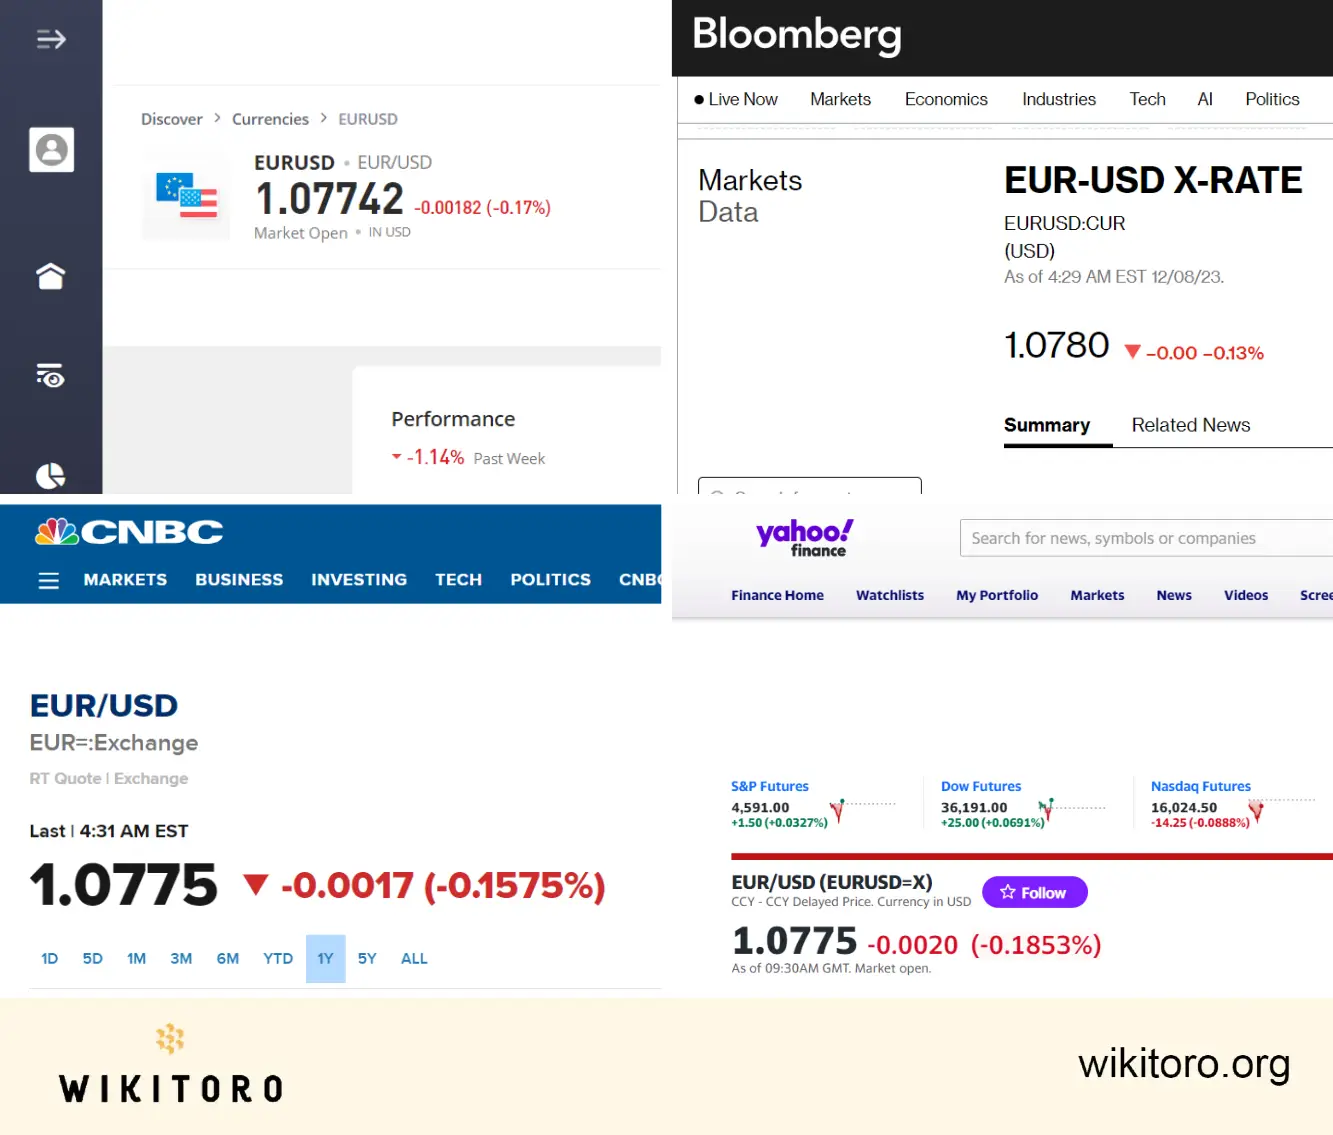 eToro market data compared with Bloomberg, CNBC and Yahoo